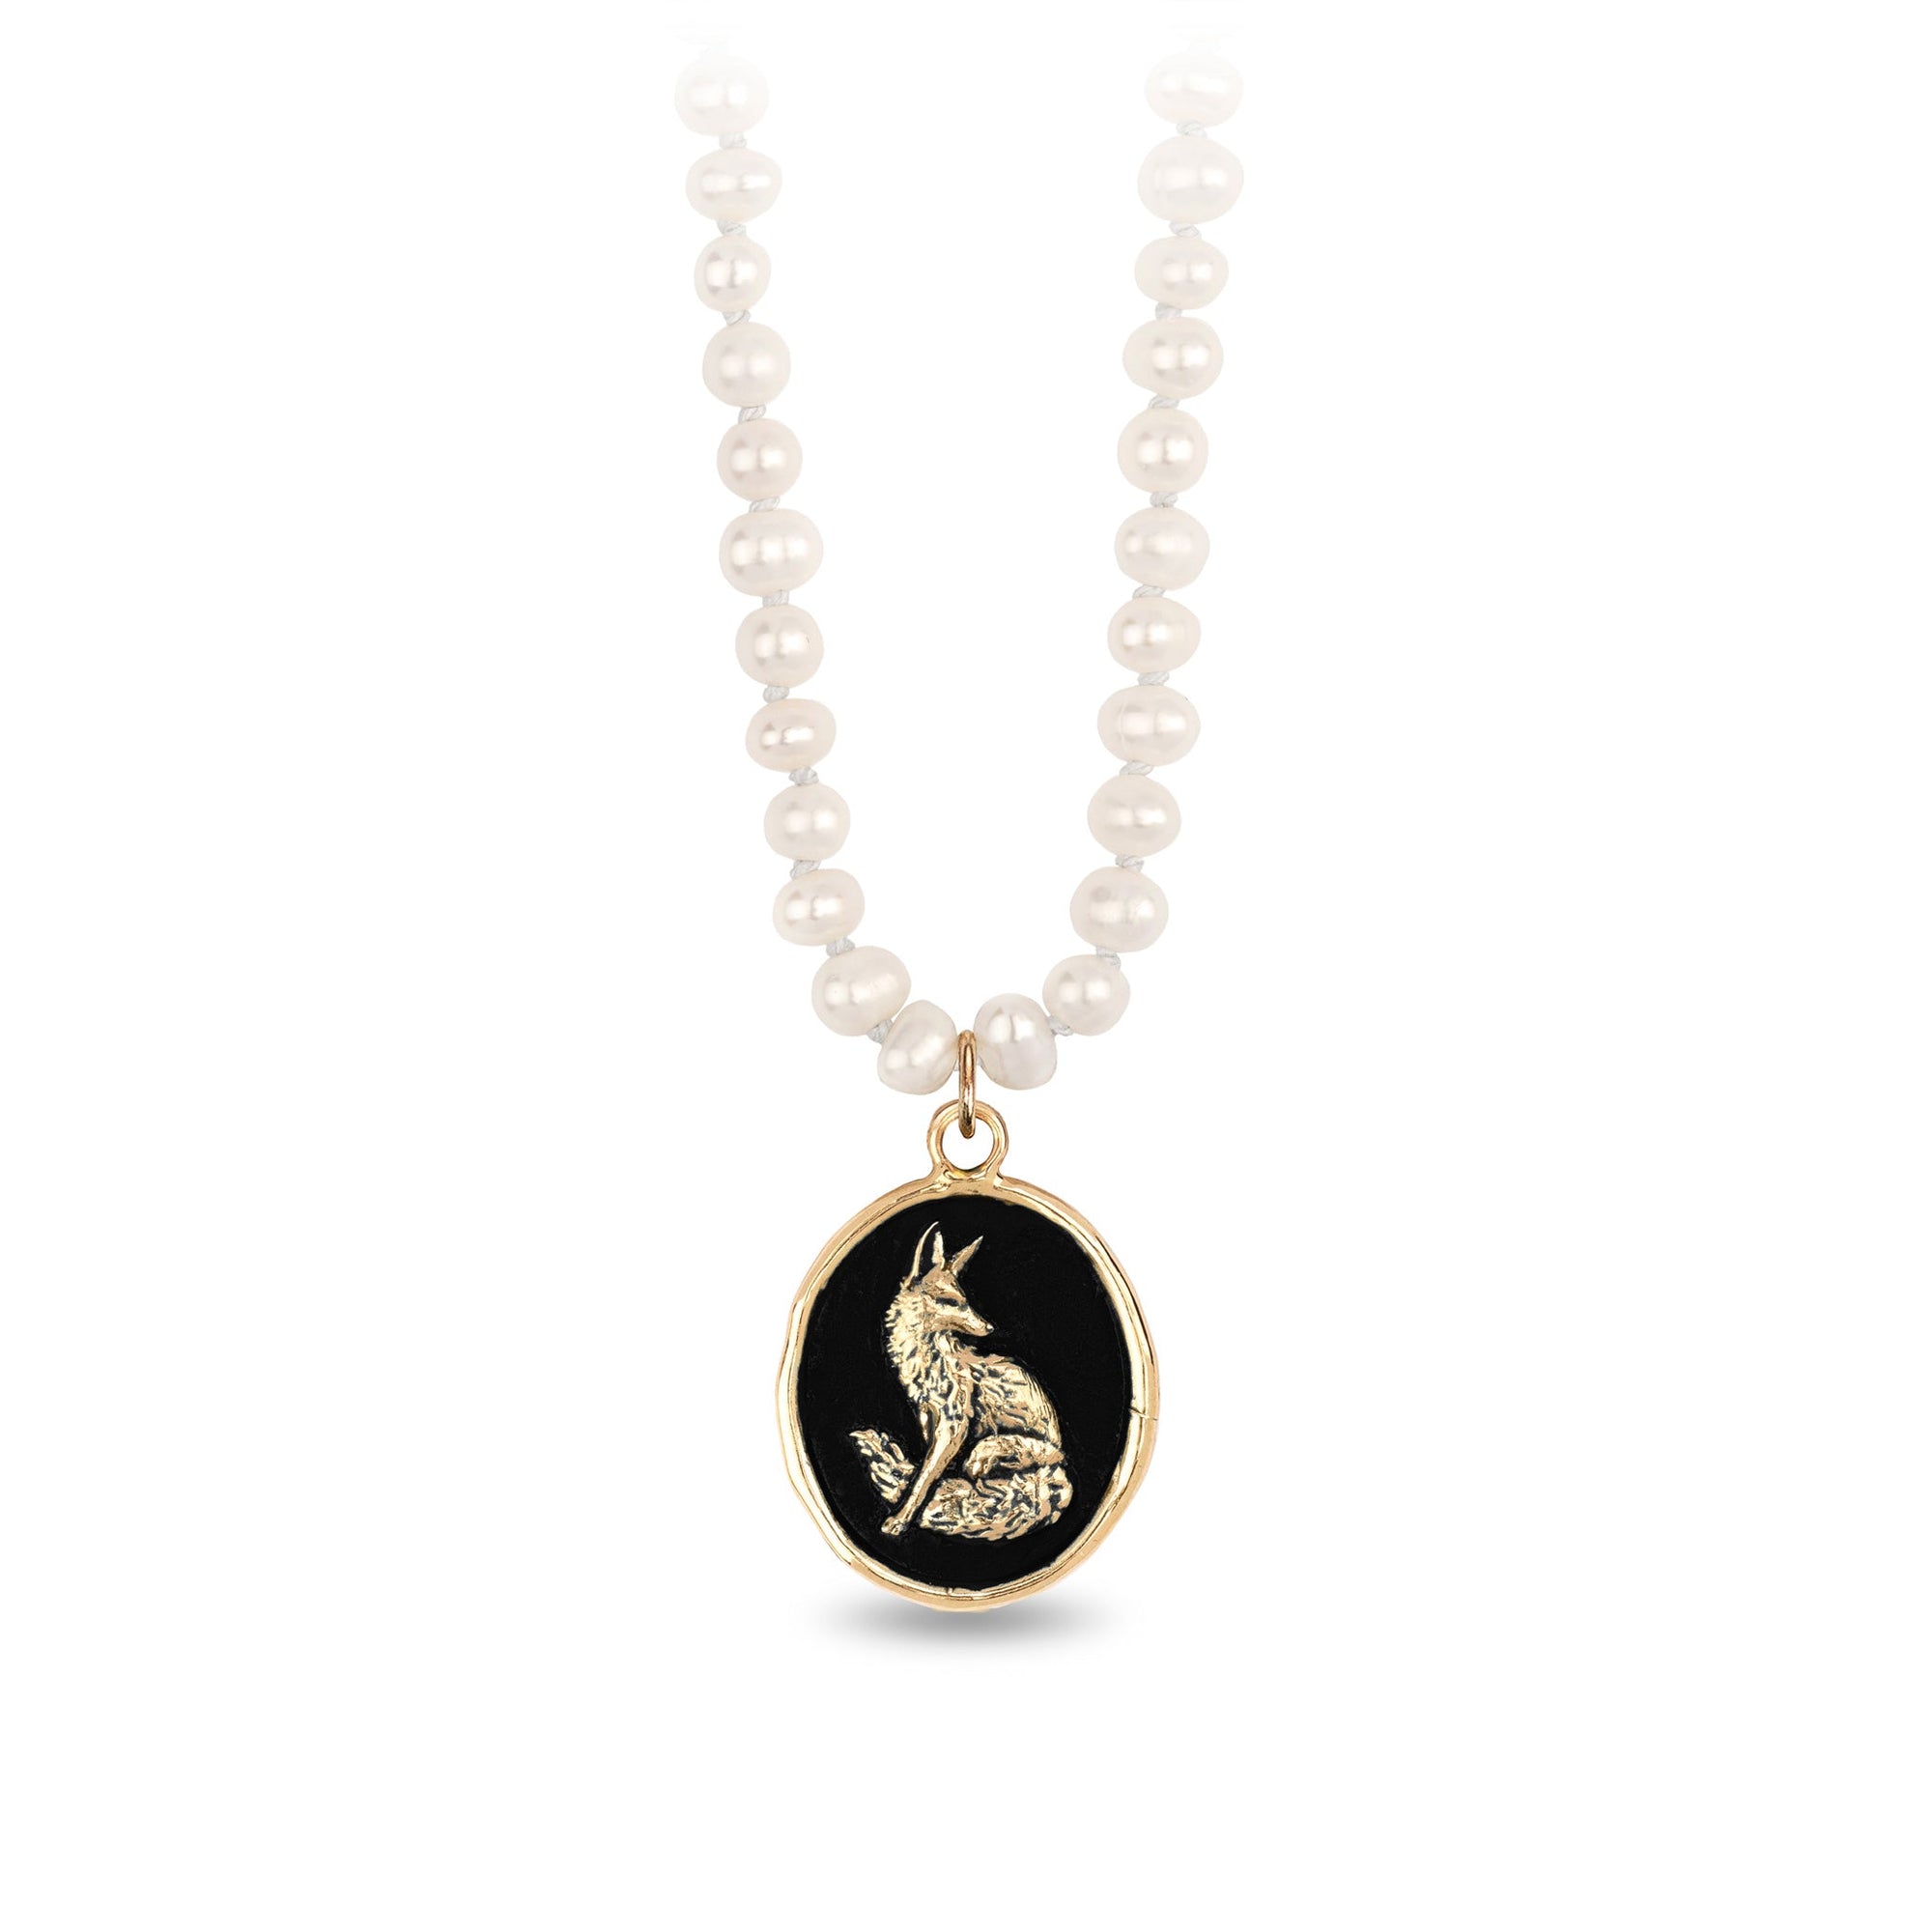 Trust in Yourself 14K Gold Talisman On Knotted Freshwater Pearl Necklace